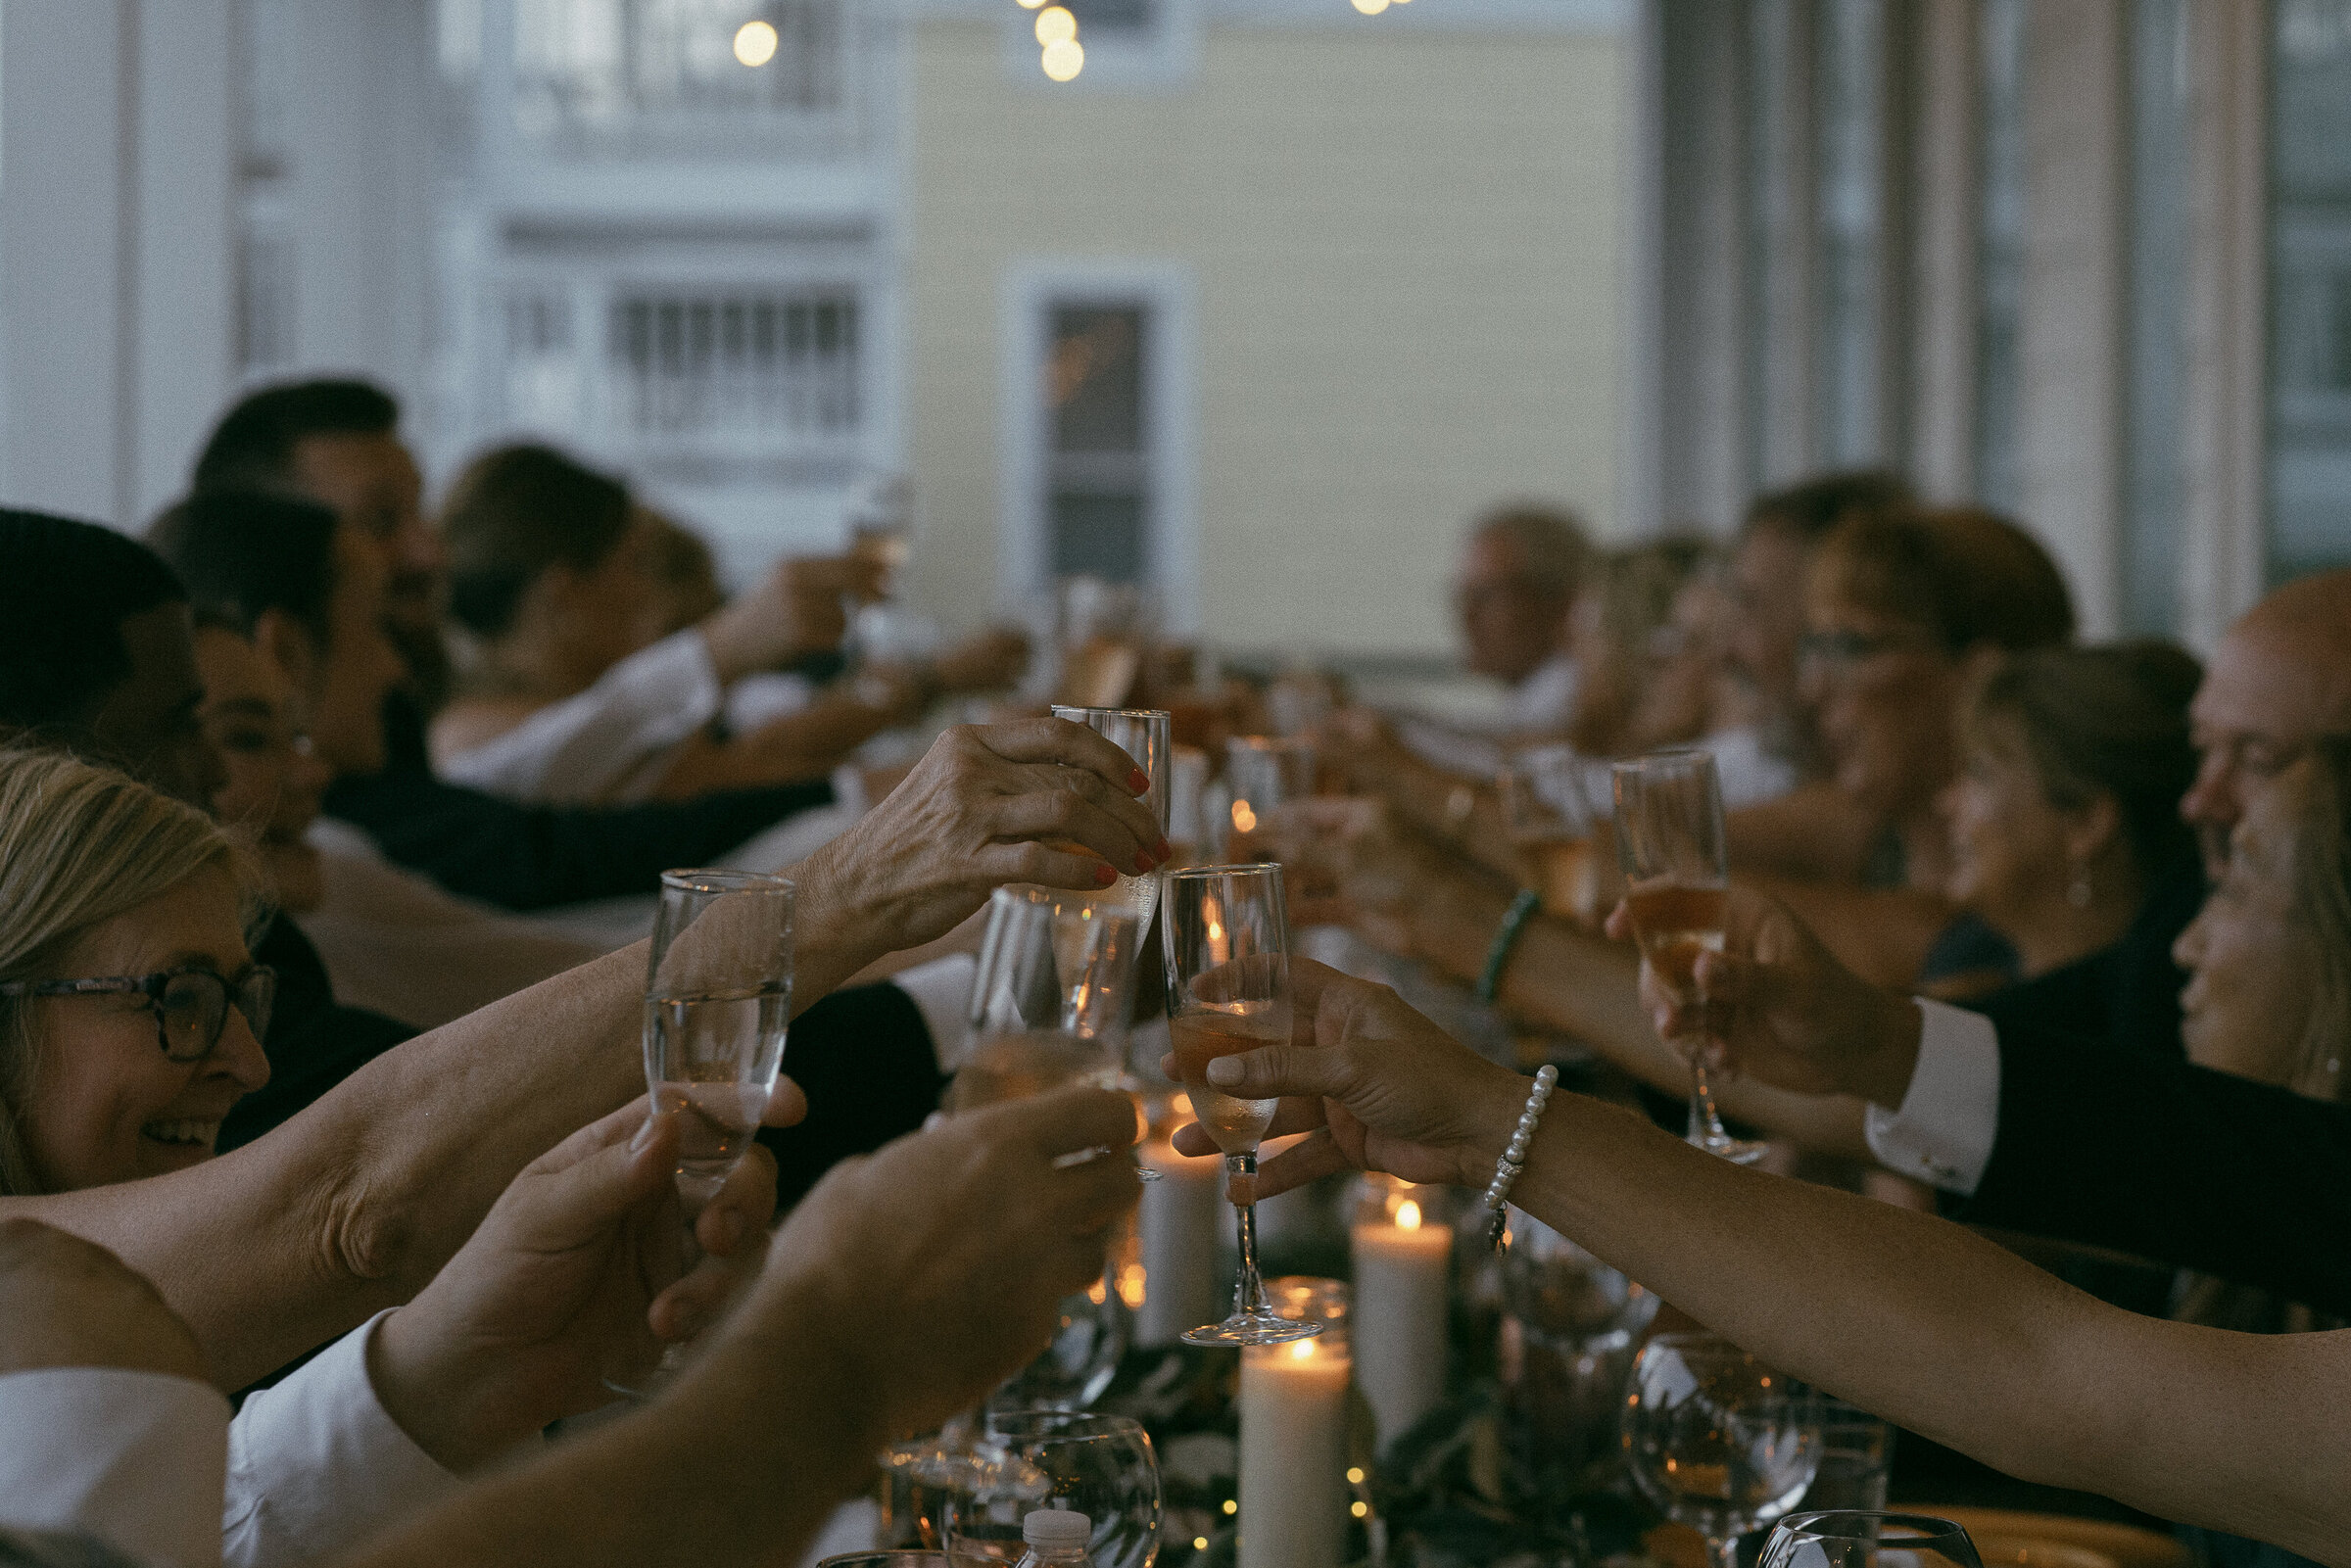 Guests toasting at a wedding reception dinner table.